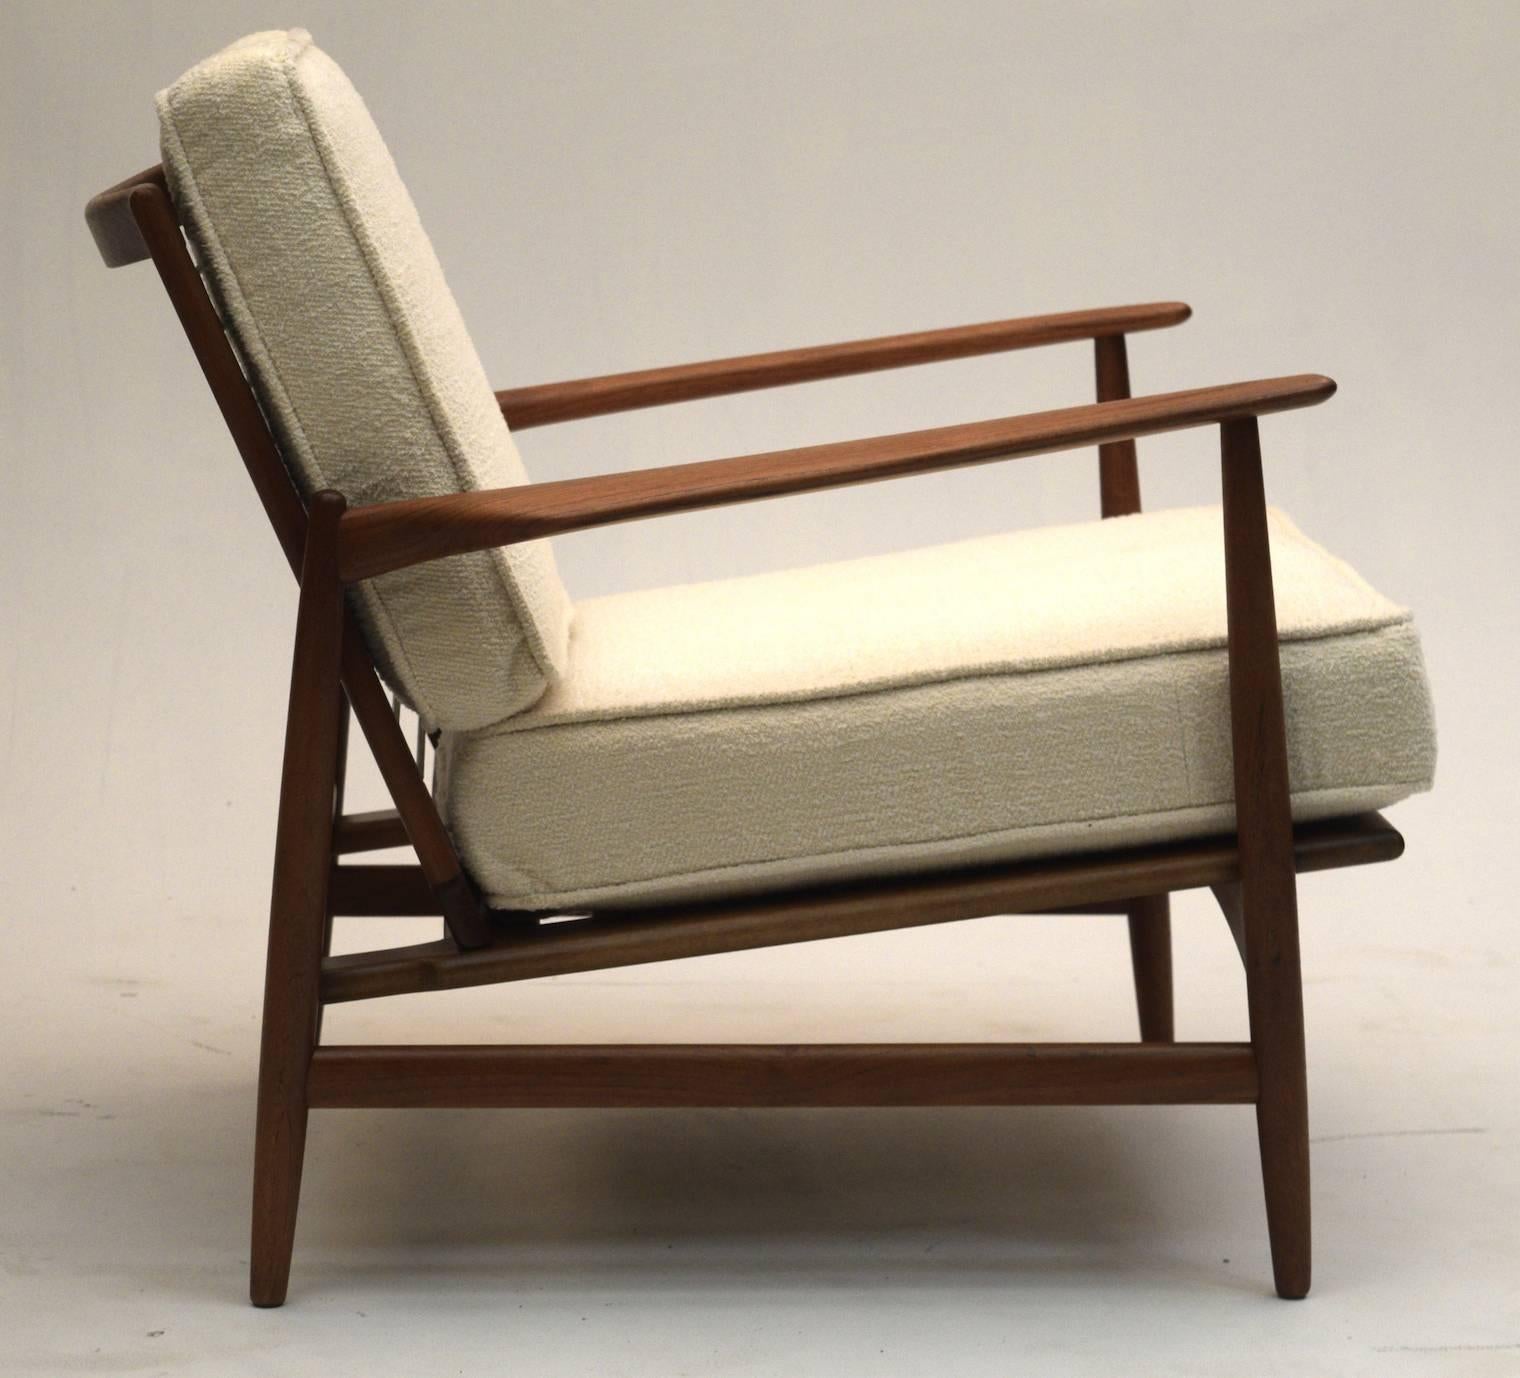 From Ib Kofod Larsen comes this stunning chair in impeccable condition with the teak sealed in a special coating to maintain this look for decades. All new foam, straps and upholstery with a cotton blend in off-white cream coupled with welt cording